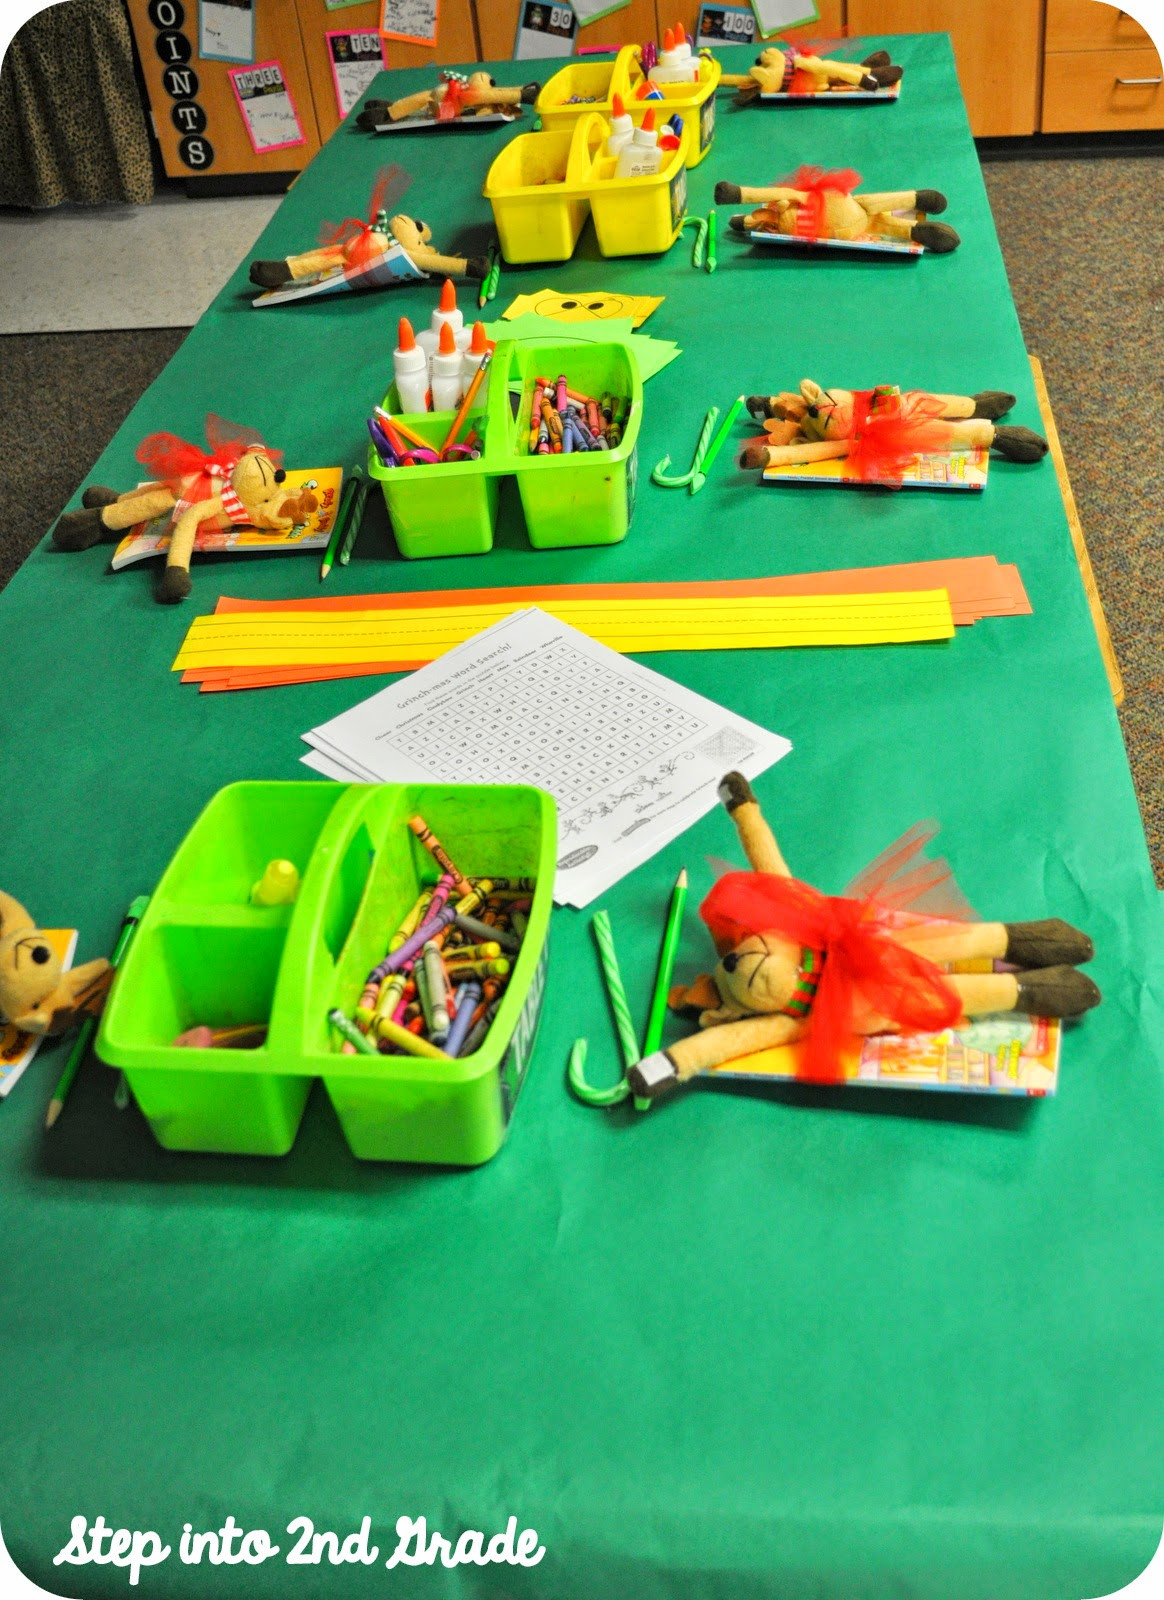 2Nd Grade Holiday Party Ideas
 Grinch Day